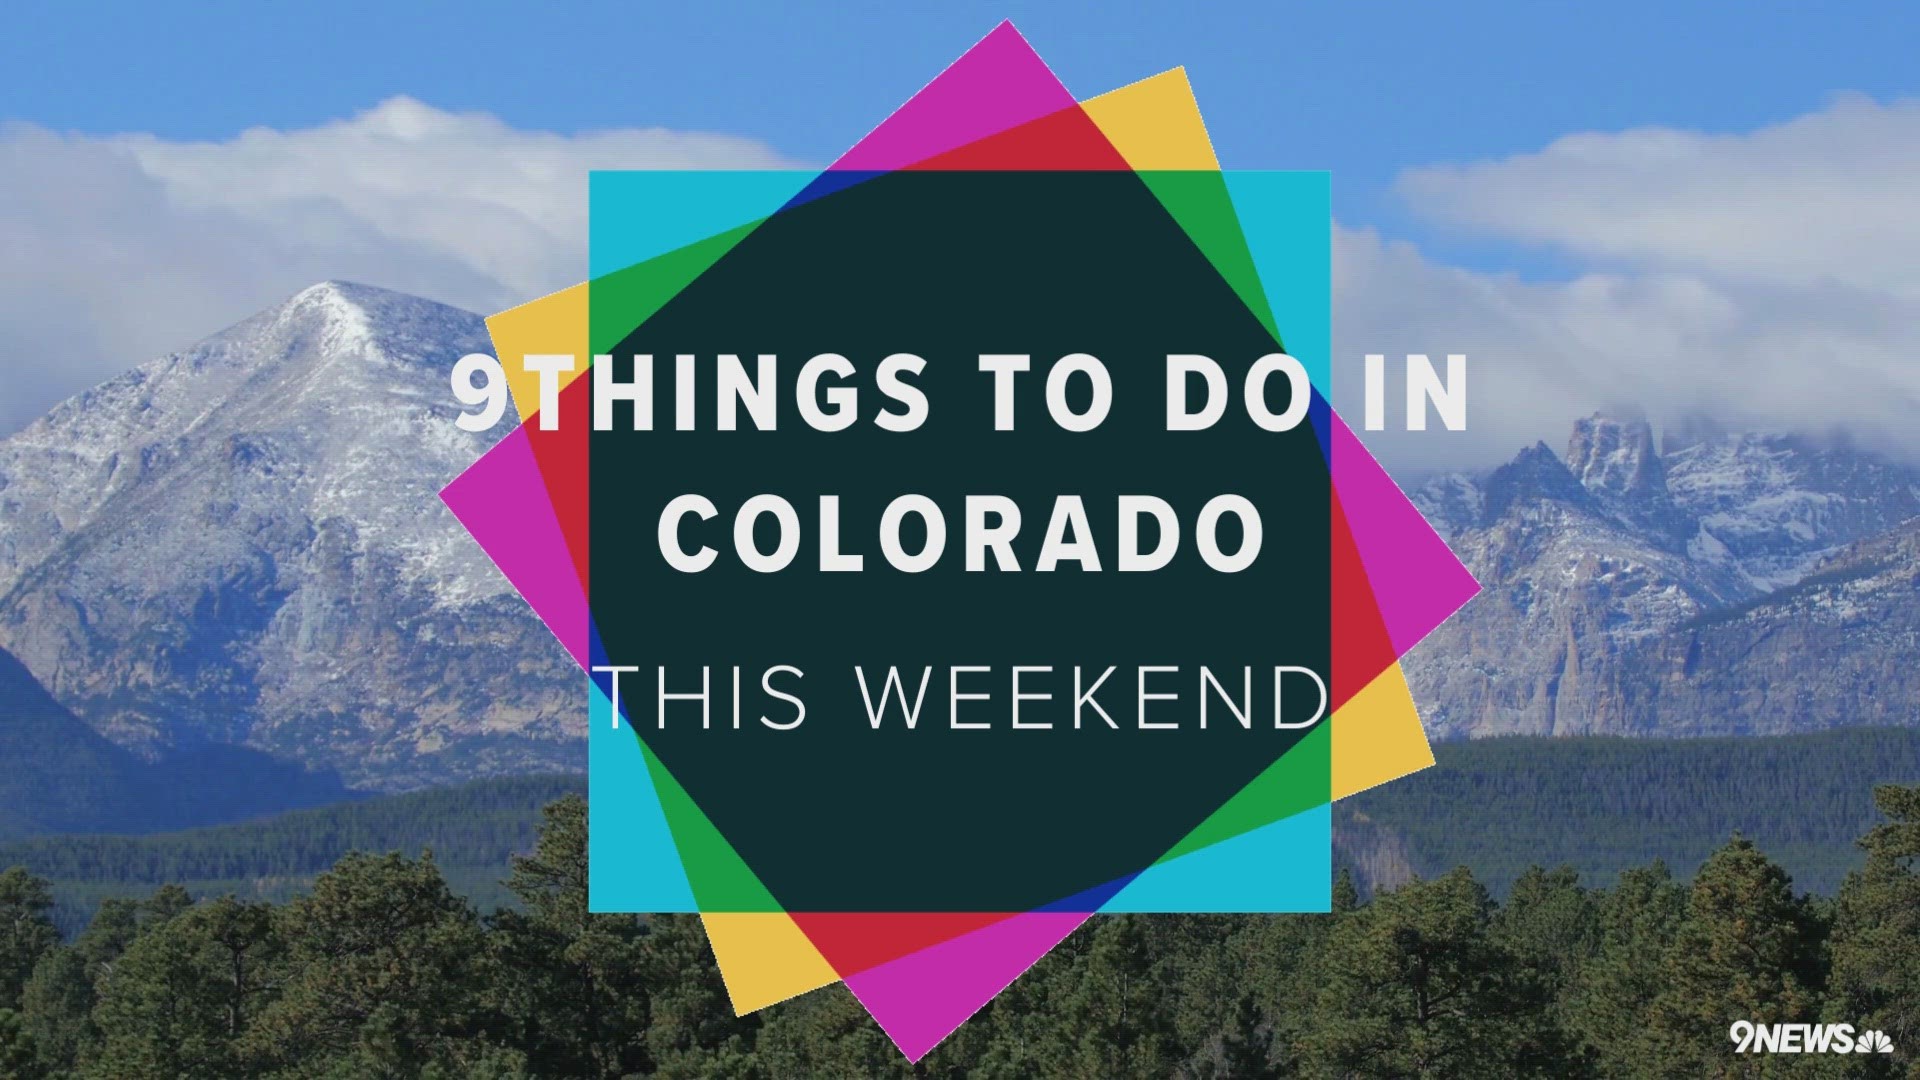 This weekend in Colorado will be full of fun events.